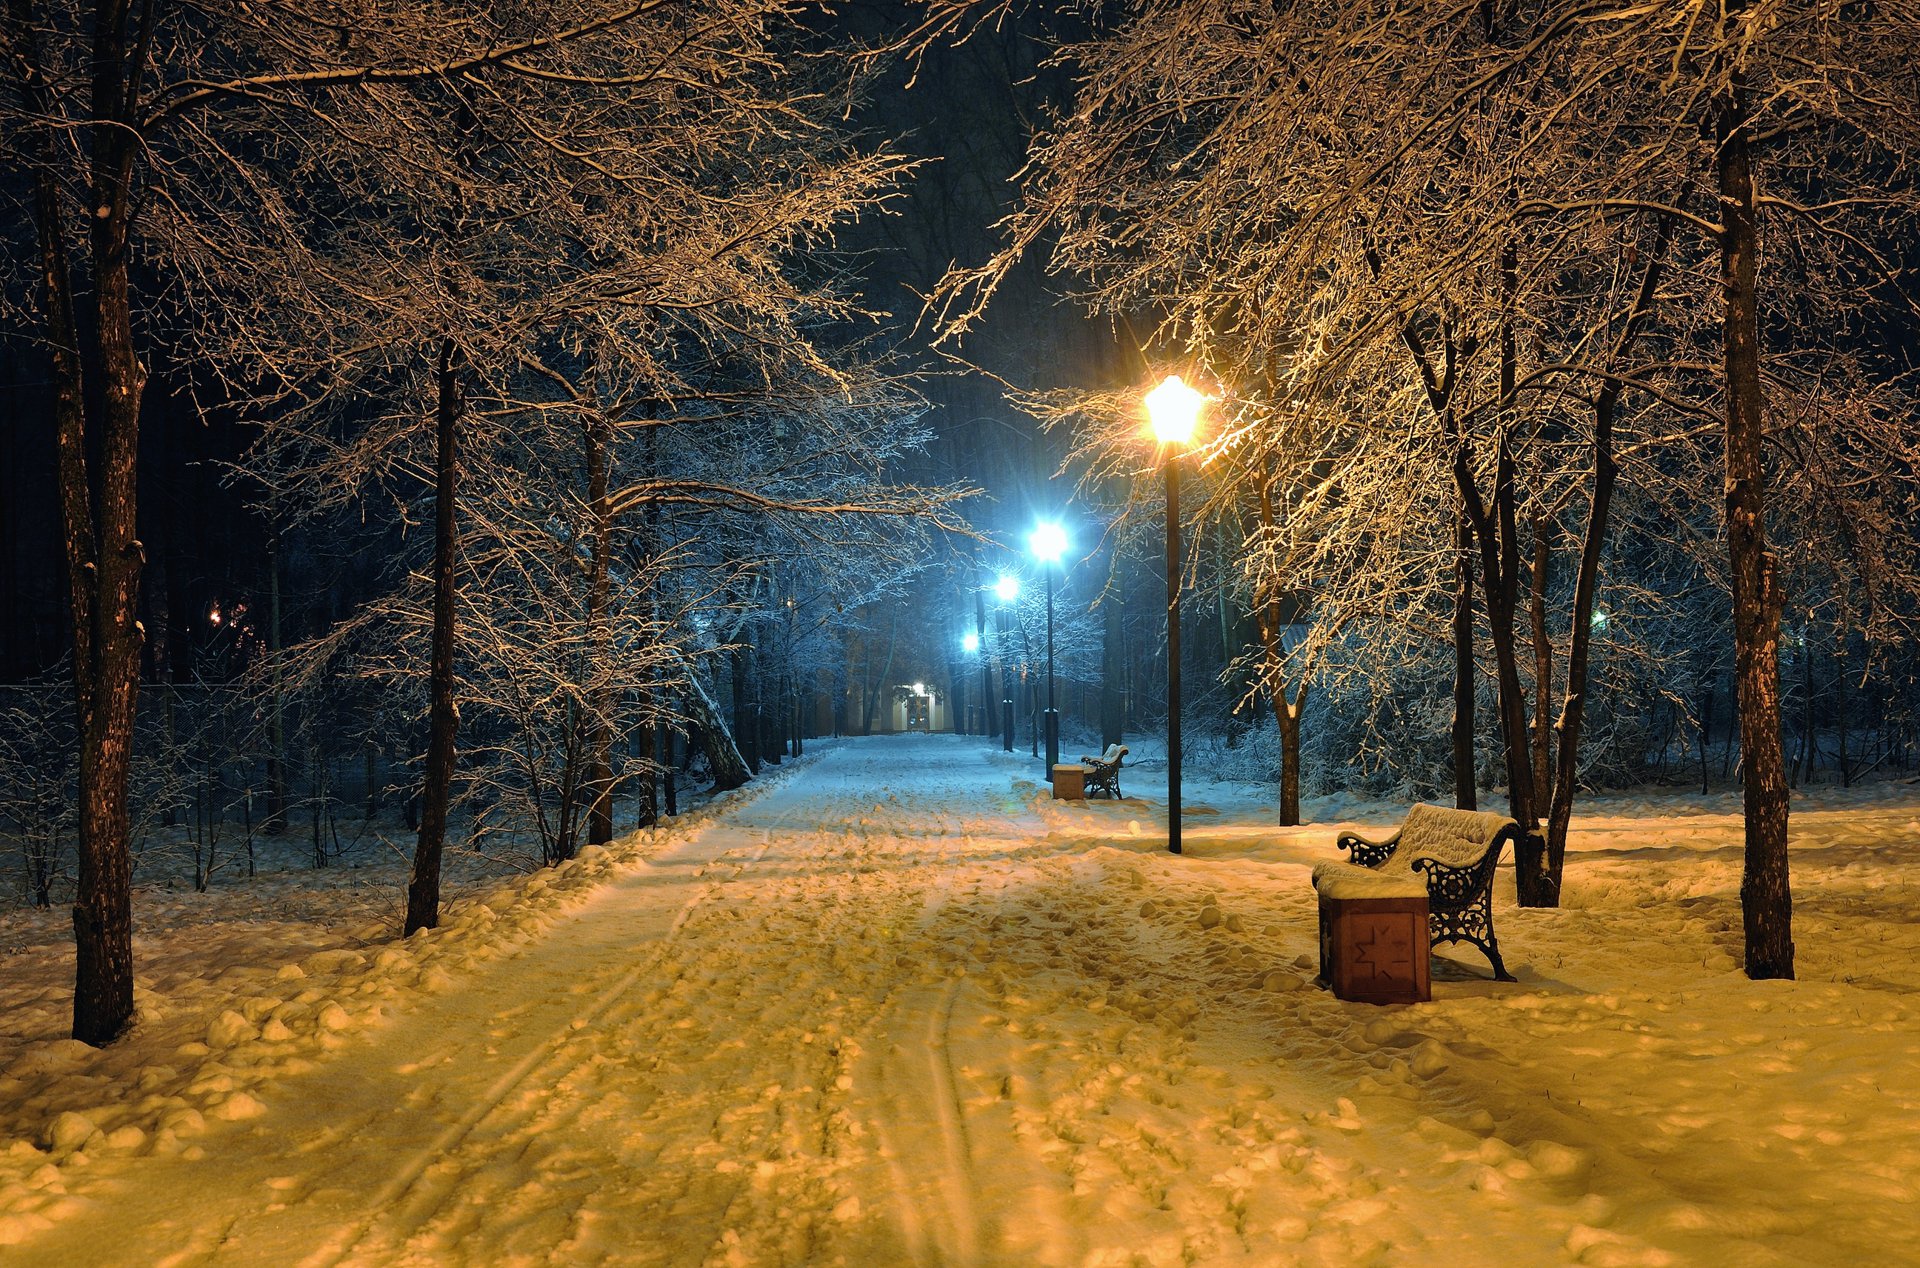 romantic-evening-benches-bench-seat-winter-snowy-park-road-park-nature-beautiful-scene-landscape-lamppost-lamp-night-midnight-lights-mood-a-romantic-evening-benches-bench-seats-winter-snow-park-road-p